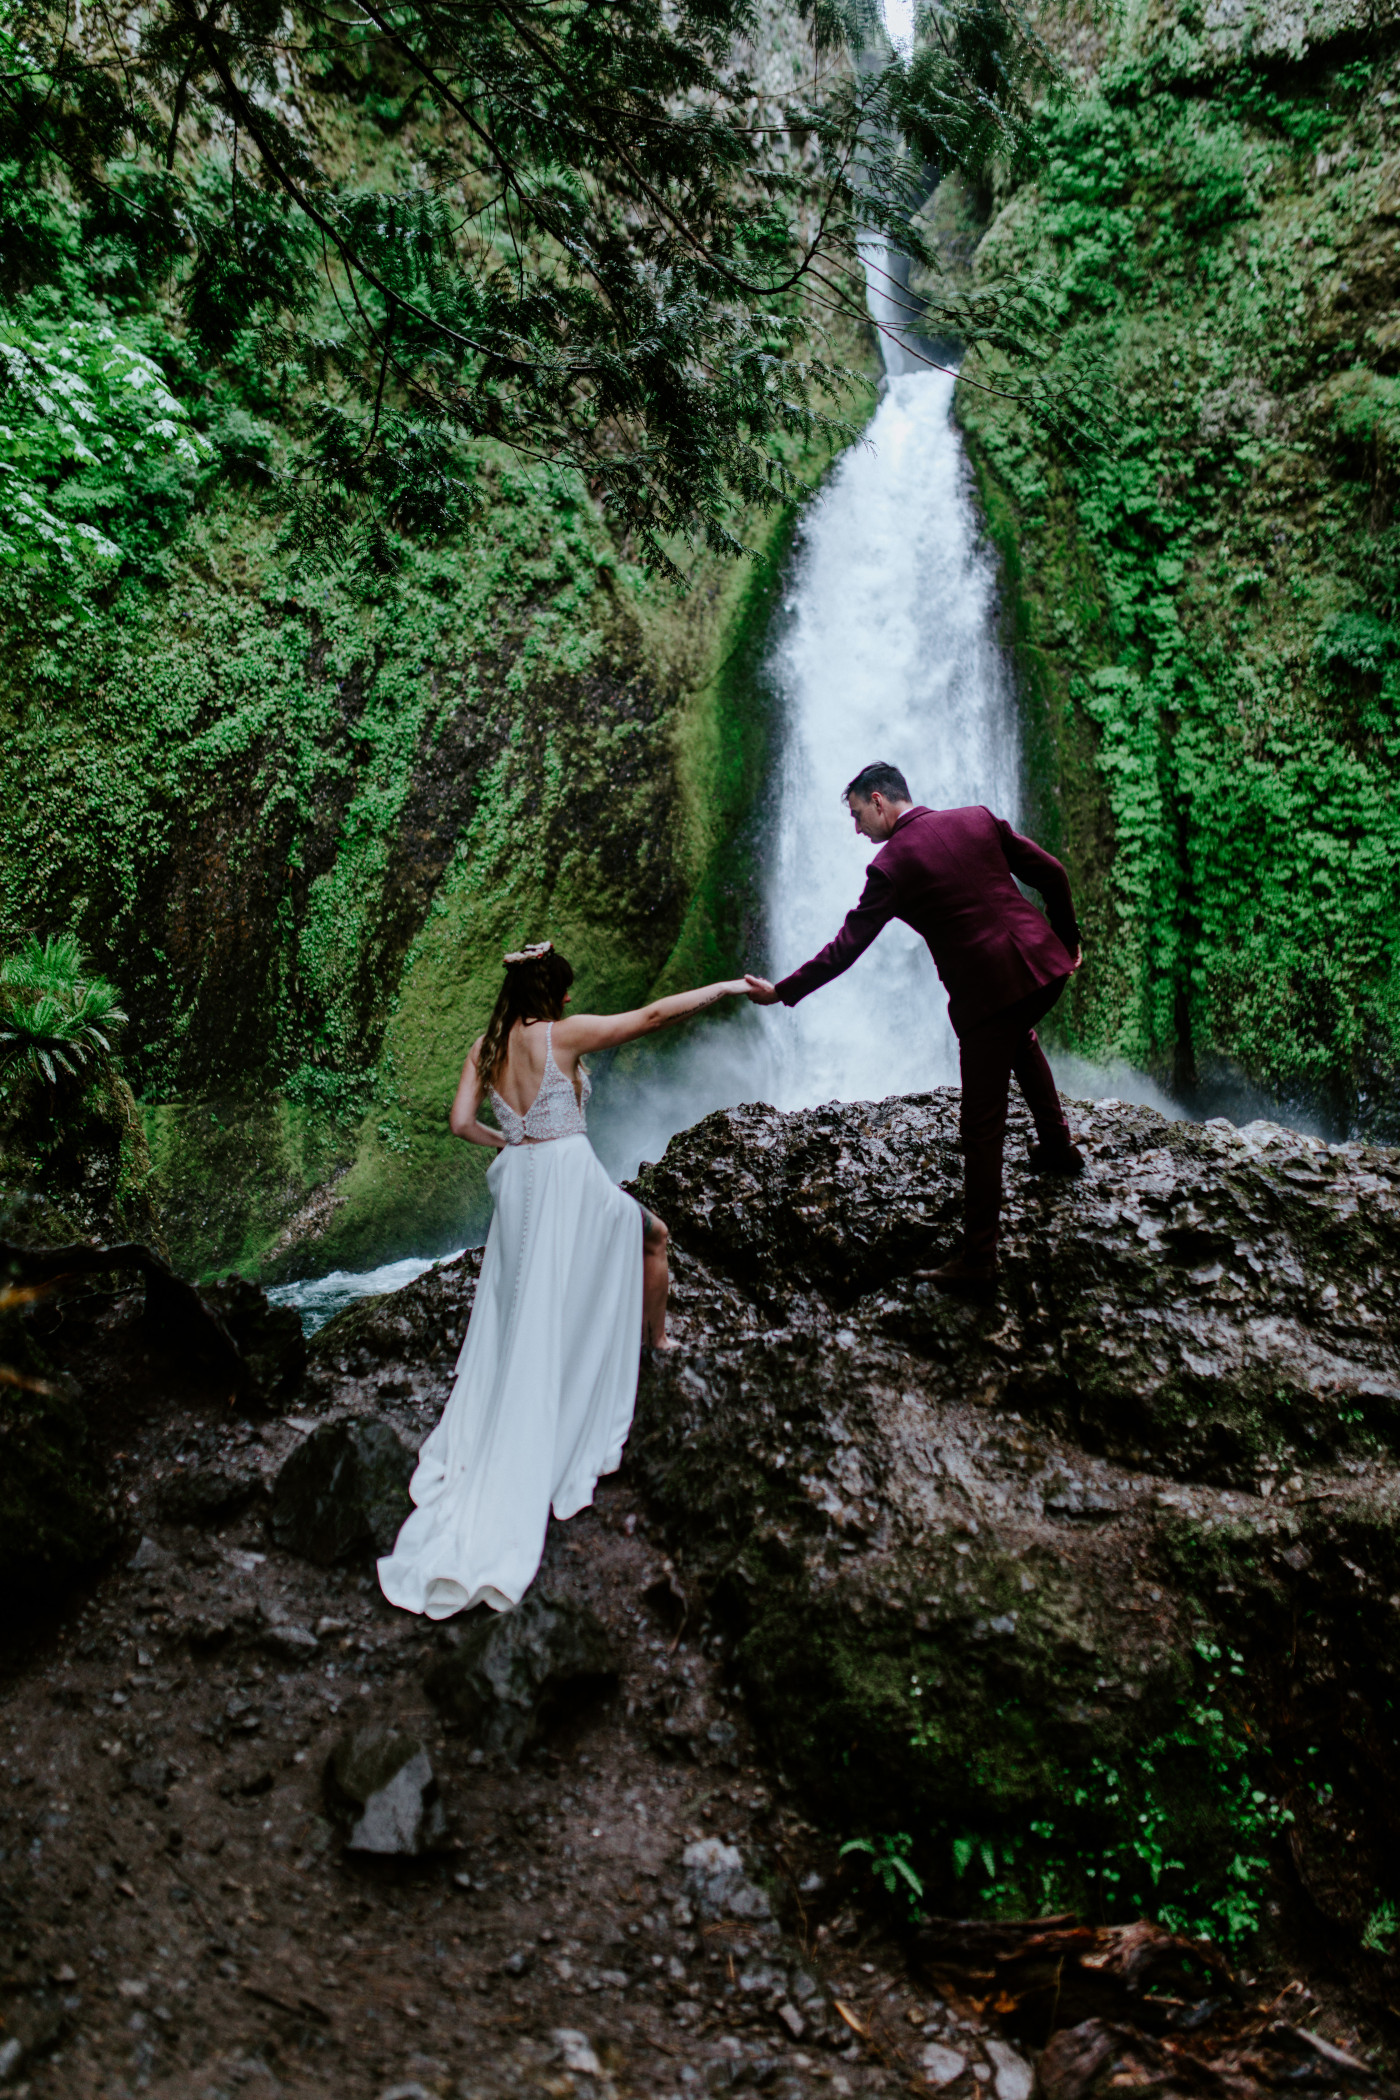 Andrew helps his new bride up on the rock at Wahcella Falls where they had their elopement ceremony.